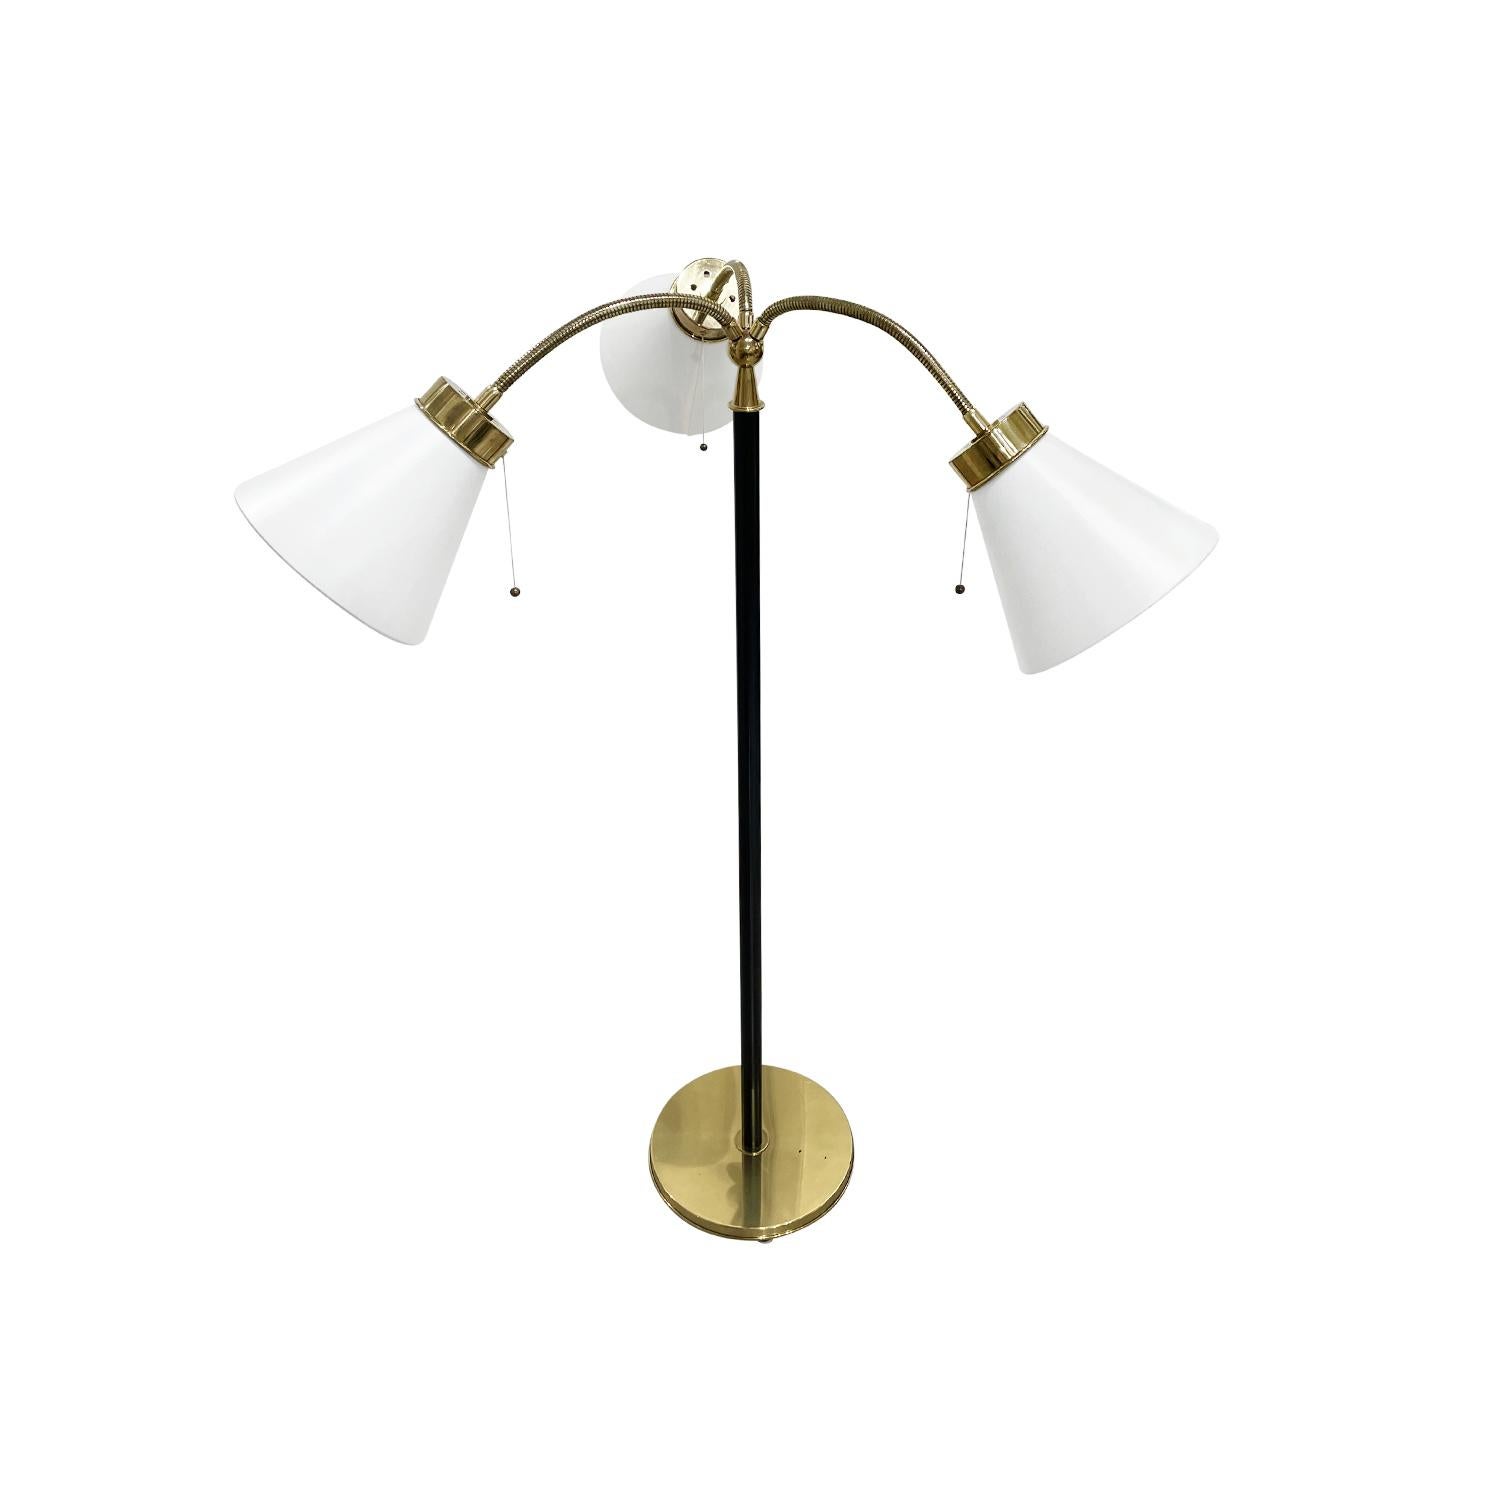 A gold-black, vintage Mid-Century modern Swedish floor lamp made of hand crafted iron and polished brass, designed by Josef Frank and produced by Svenskt Tenn in good condition. The Scandinavian light is composed with three new white conical shades,